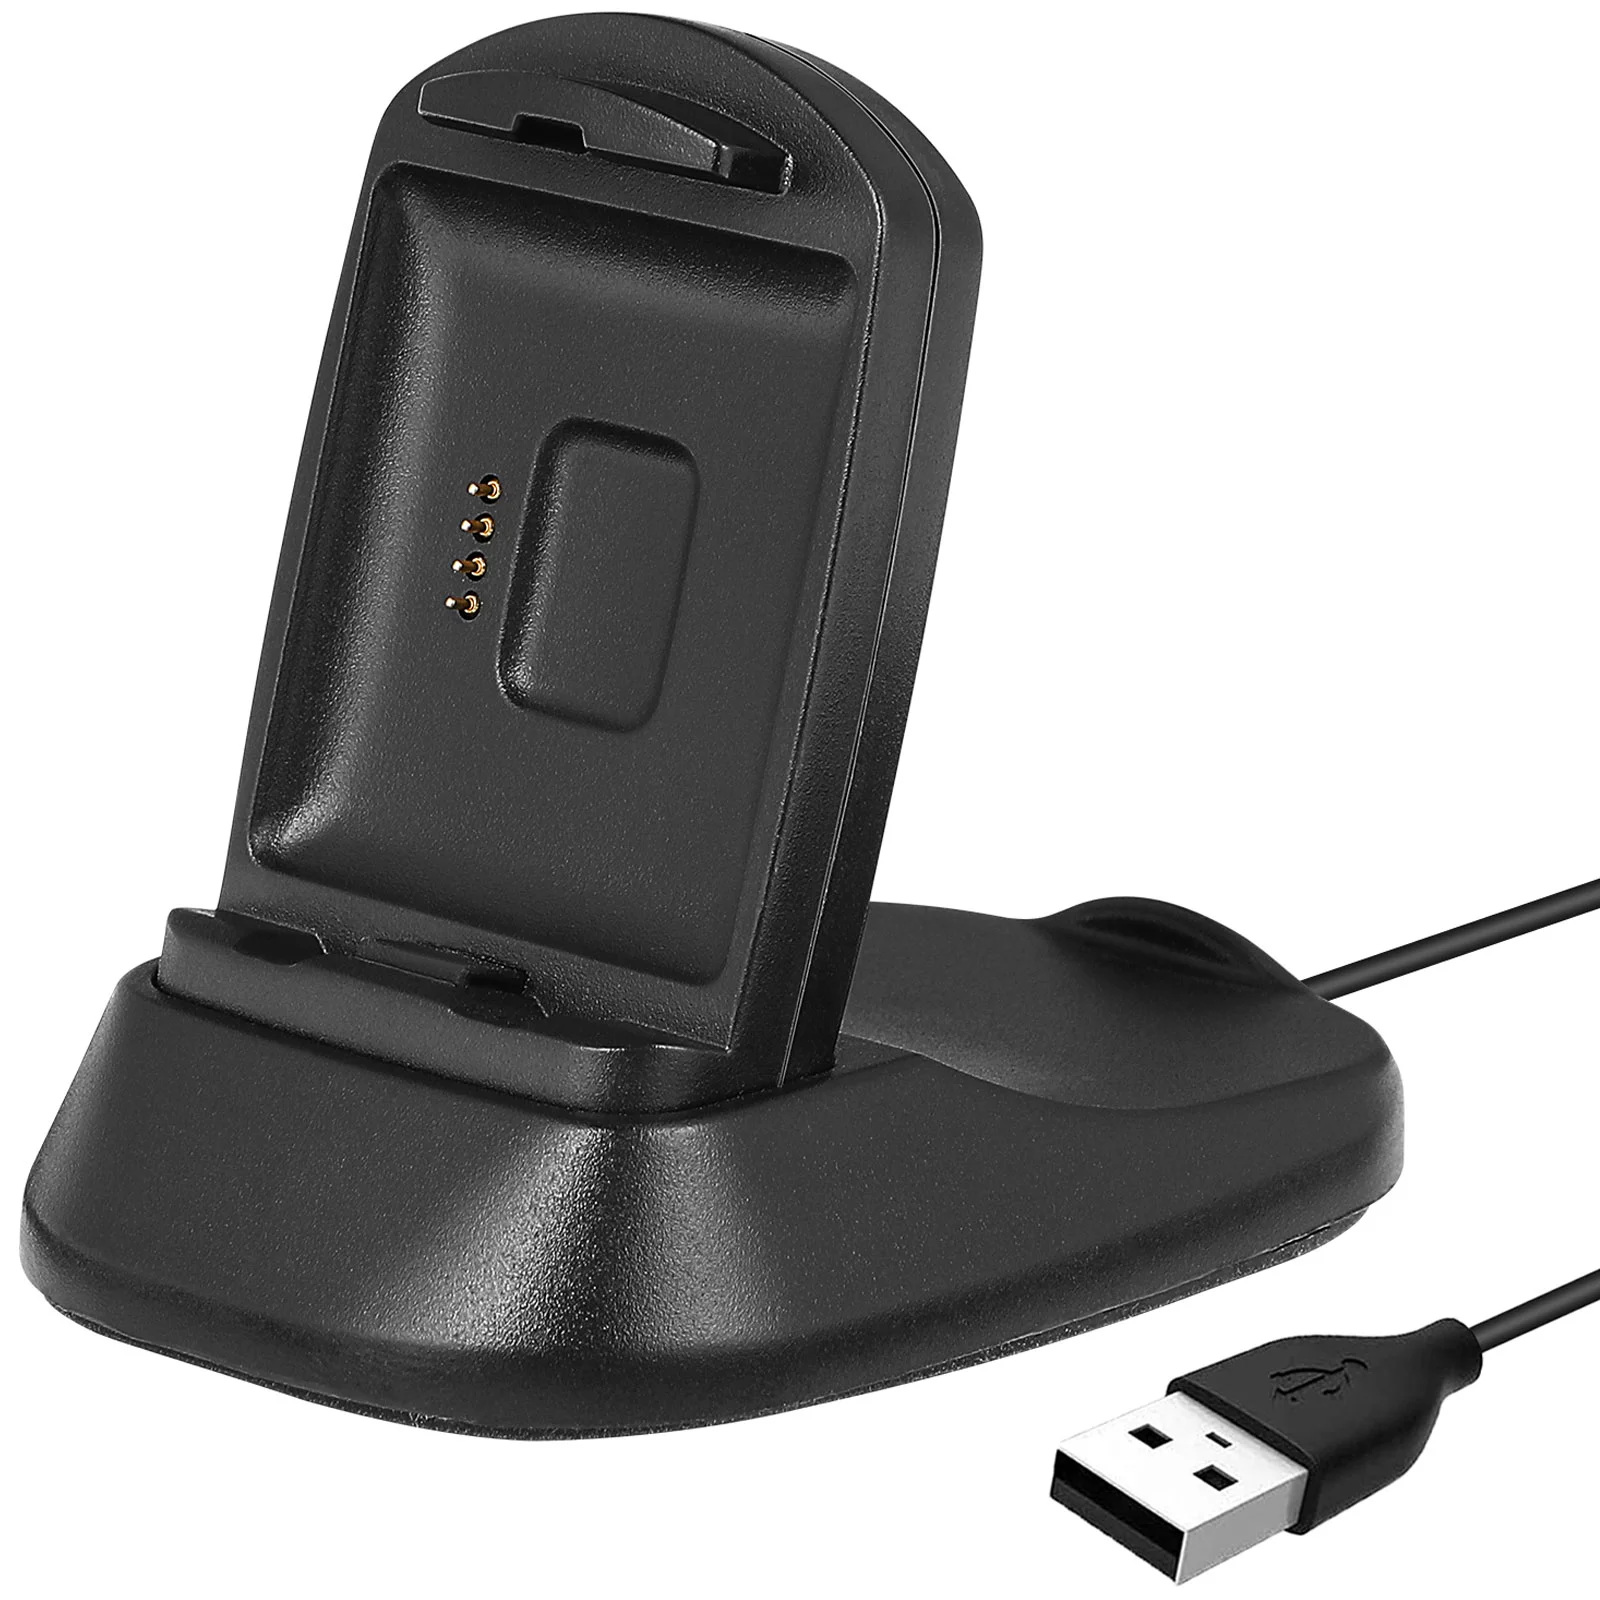 

Dock Charging Stand Cradle Holder with USB Charging Cable Compatible with Fitbit Blaze Smart Watch